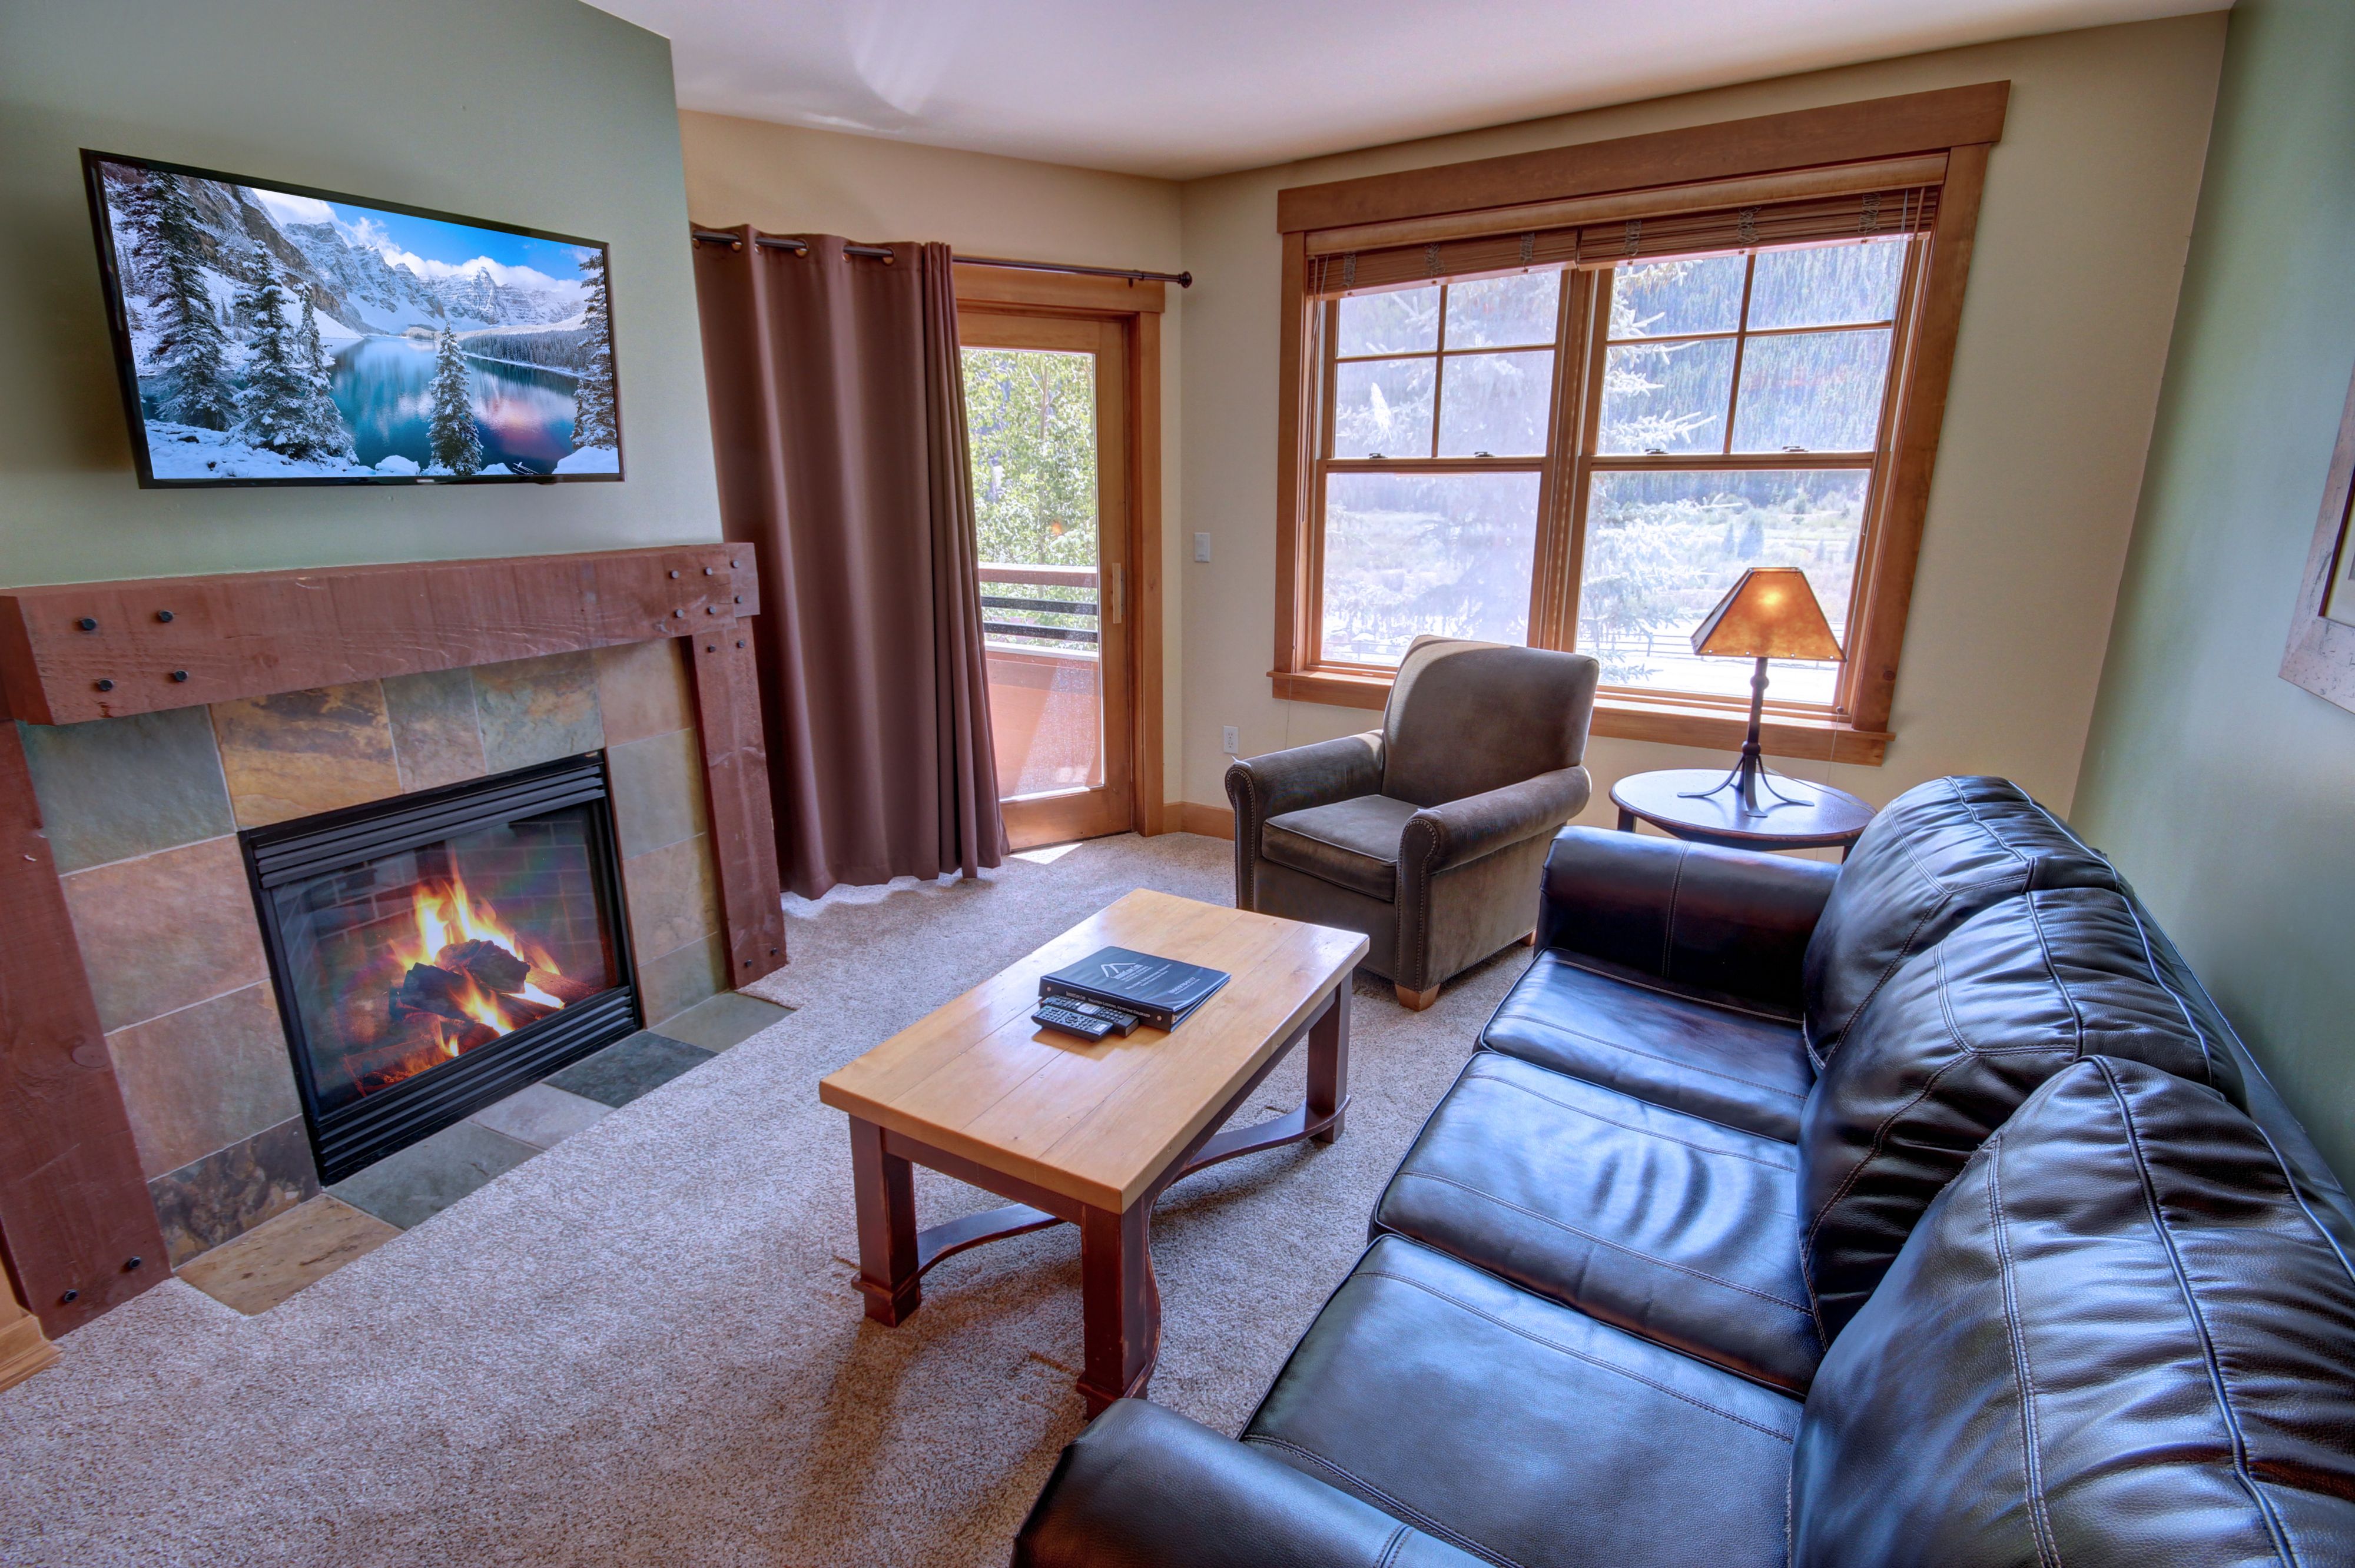 A living room with lots of natural lighting and a TV and fireplace for cold days